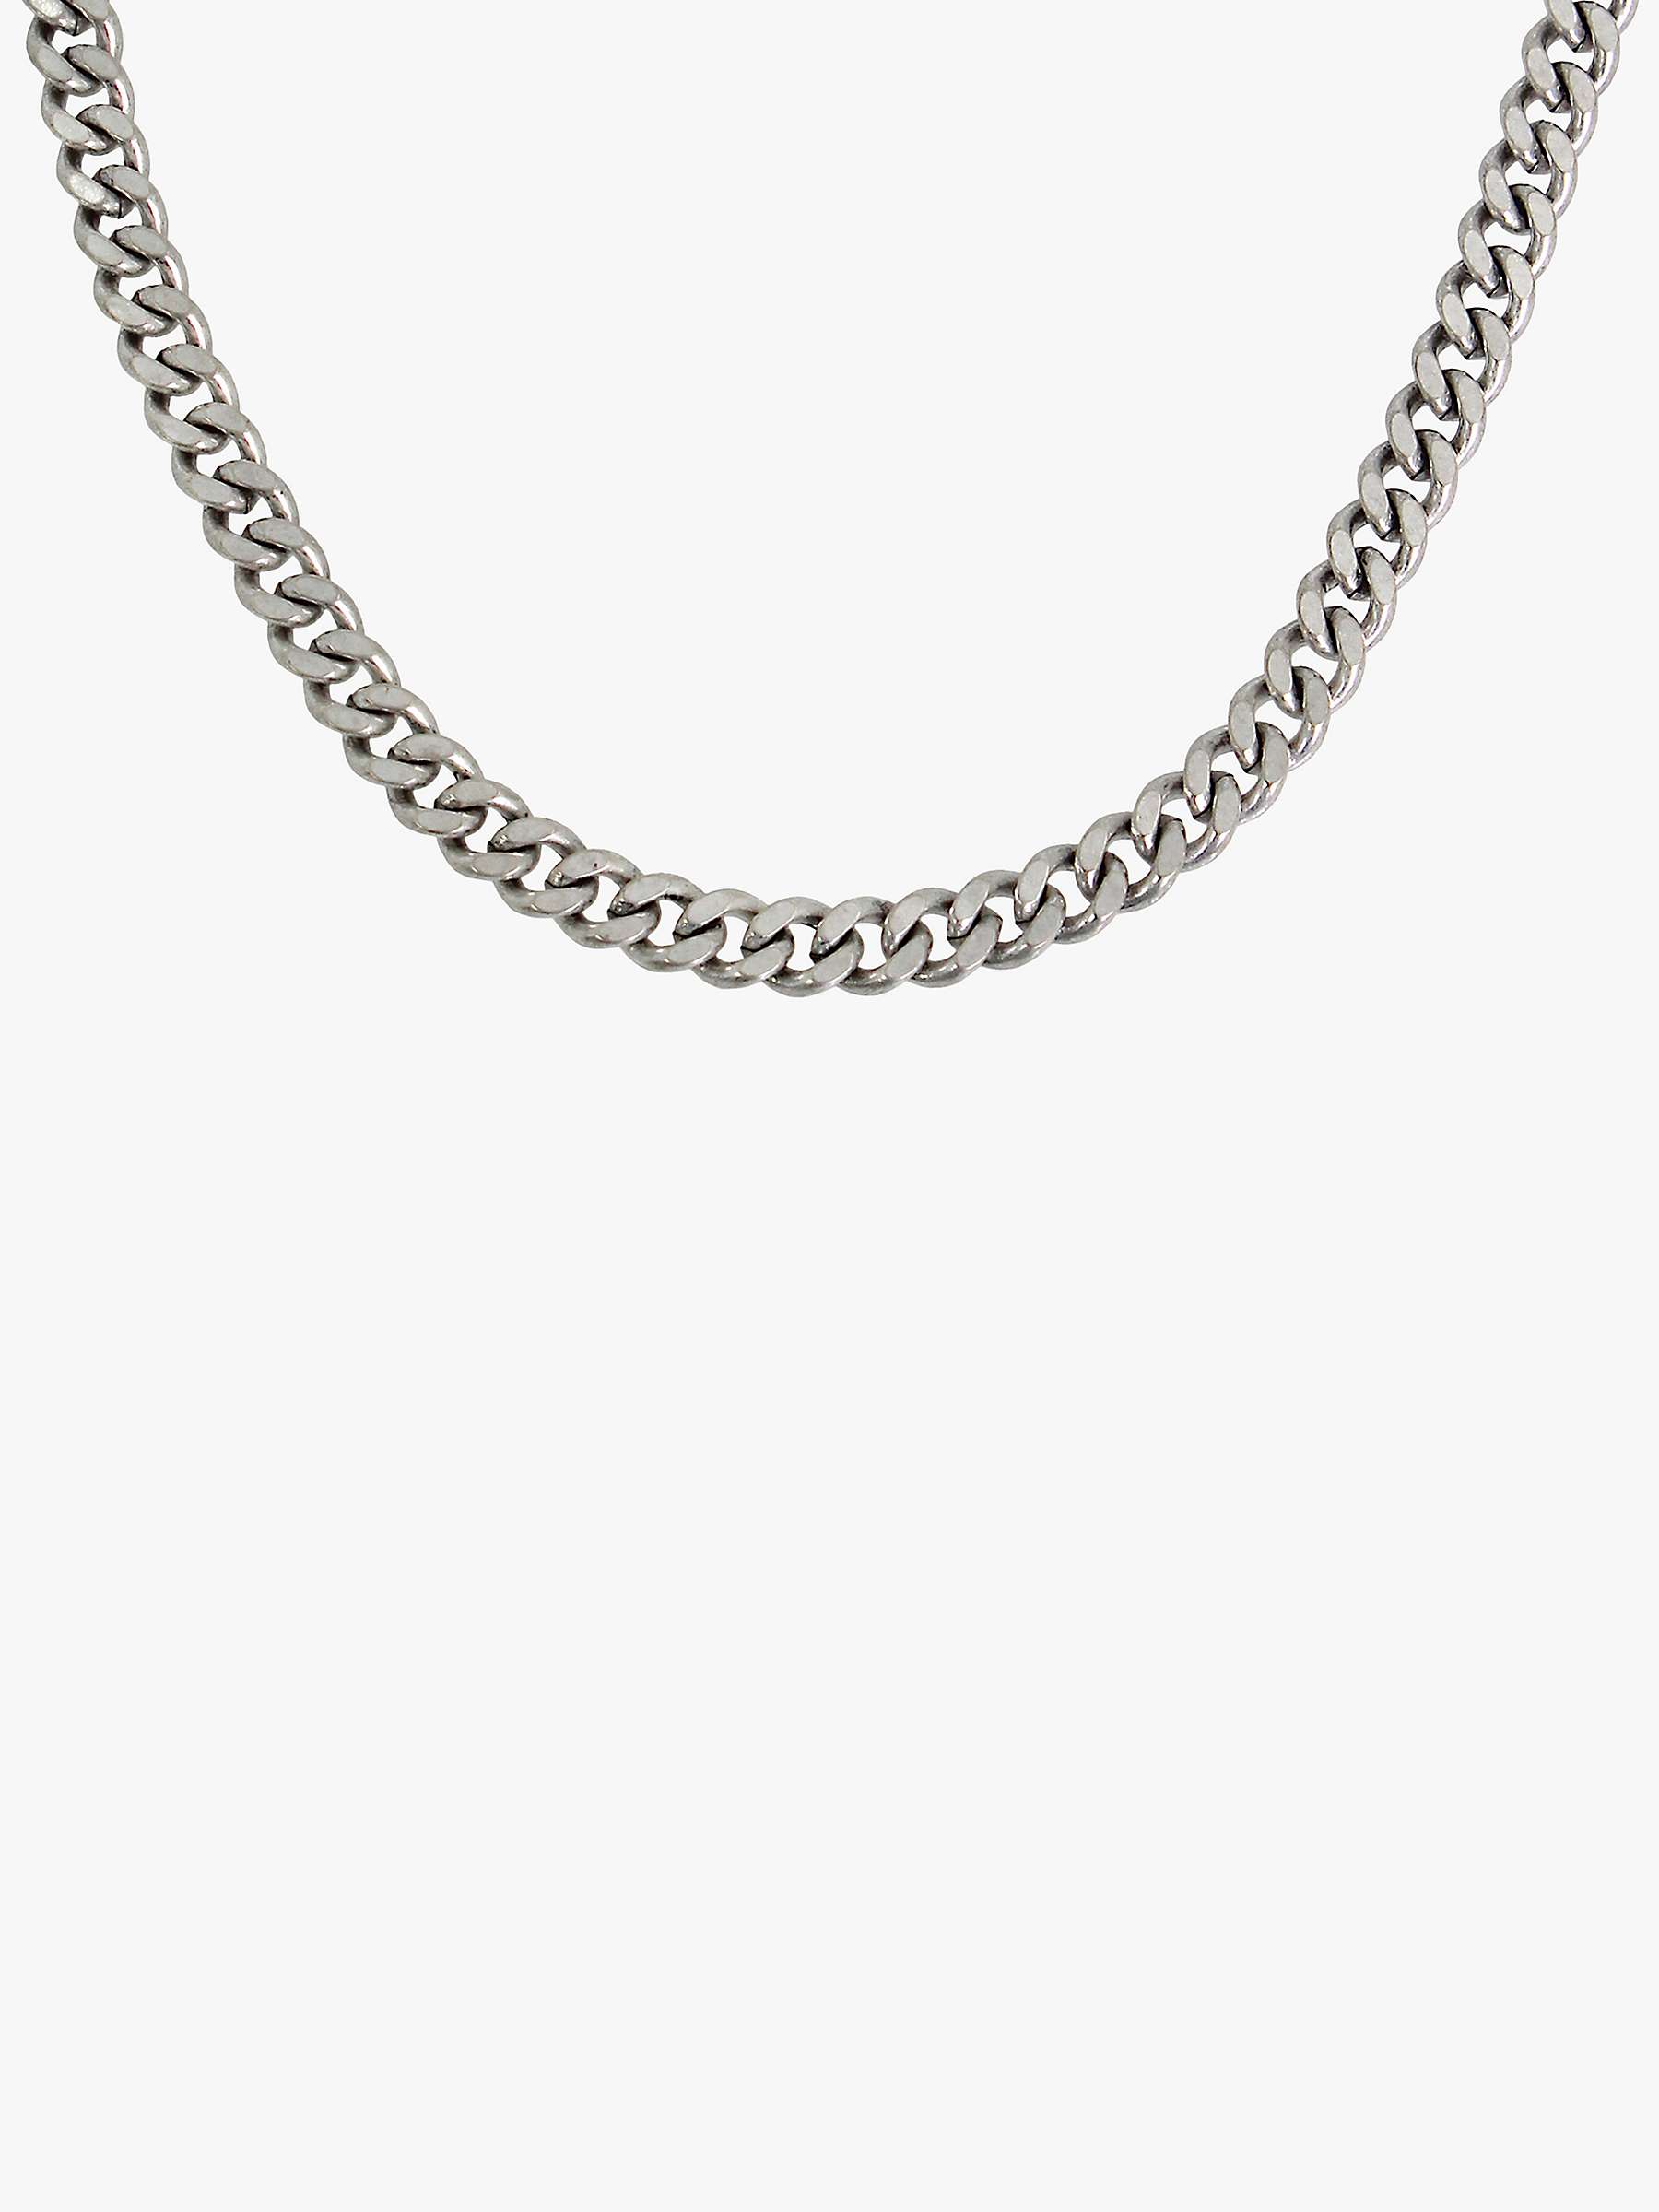 Buy AllSaints Unisex Carabiner Clasp Curb Chain Necklace, Warm Brass/Silver Online at johnlewis.com